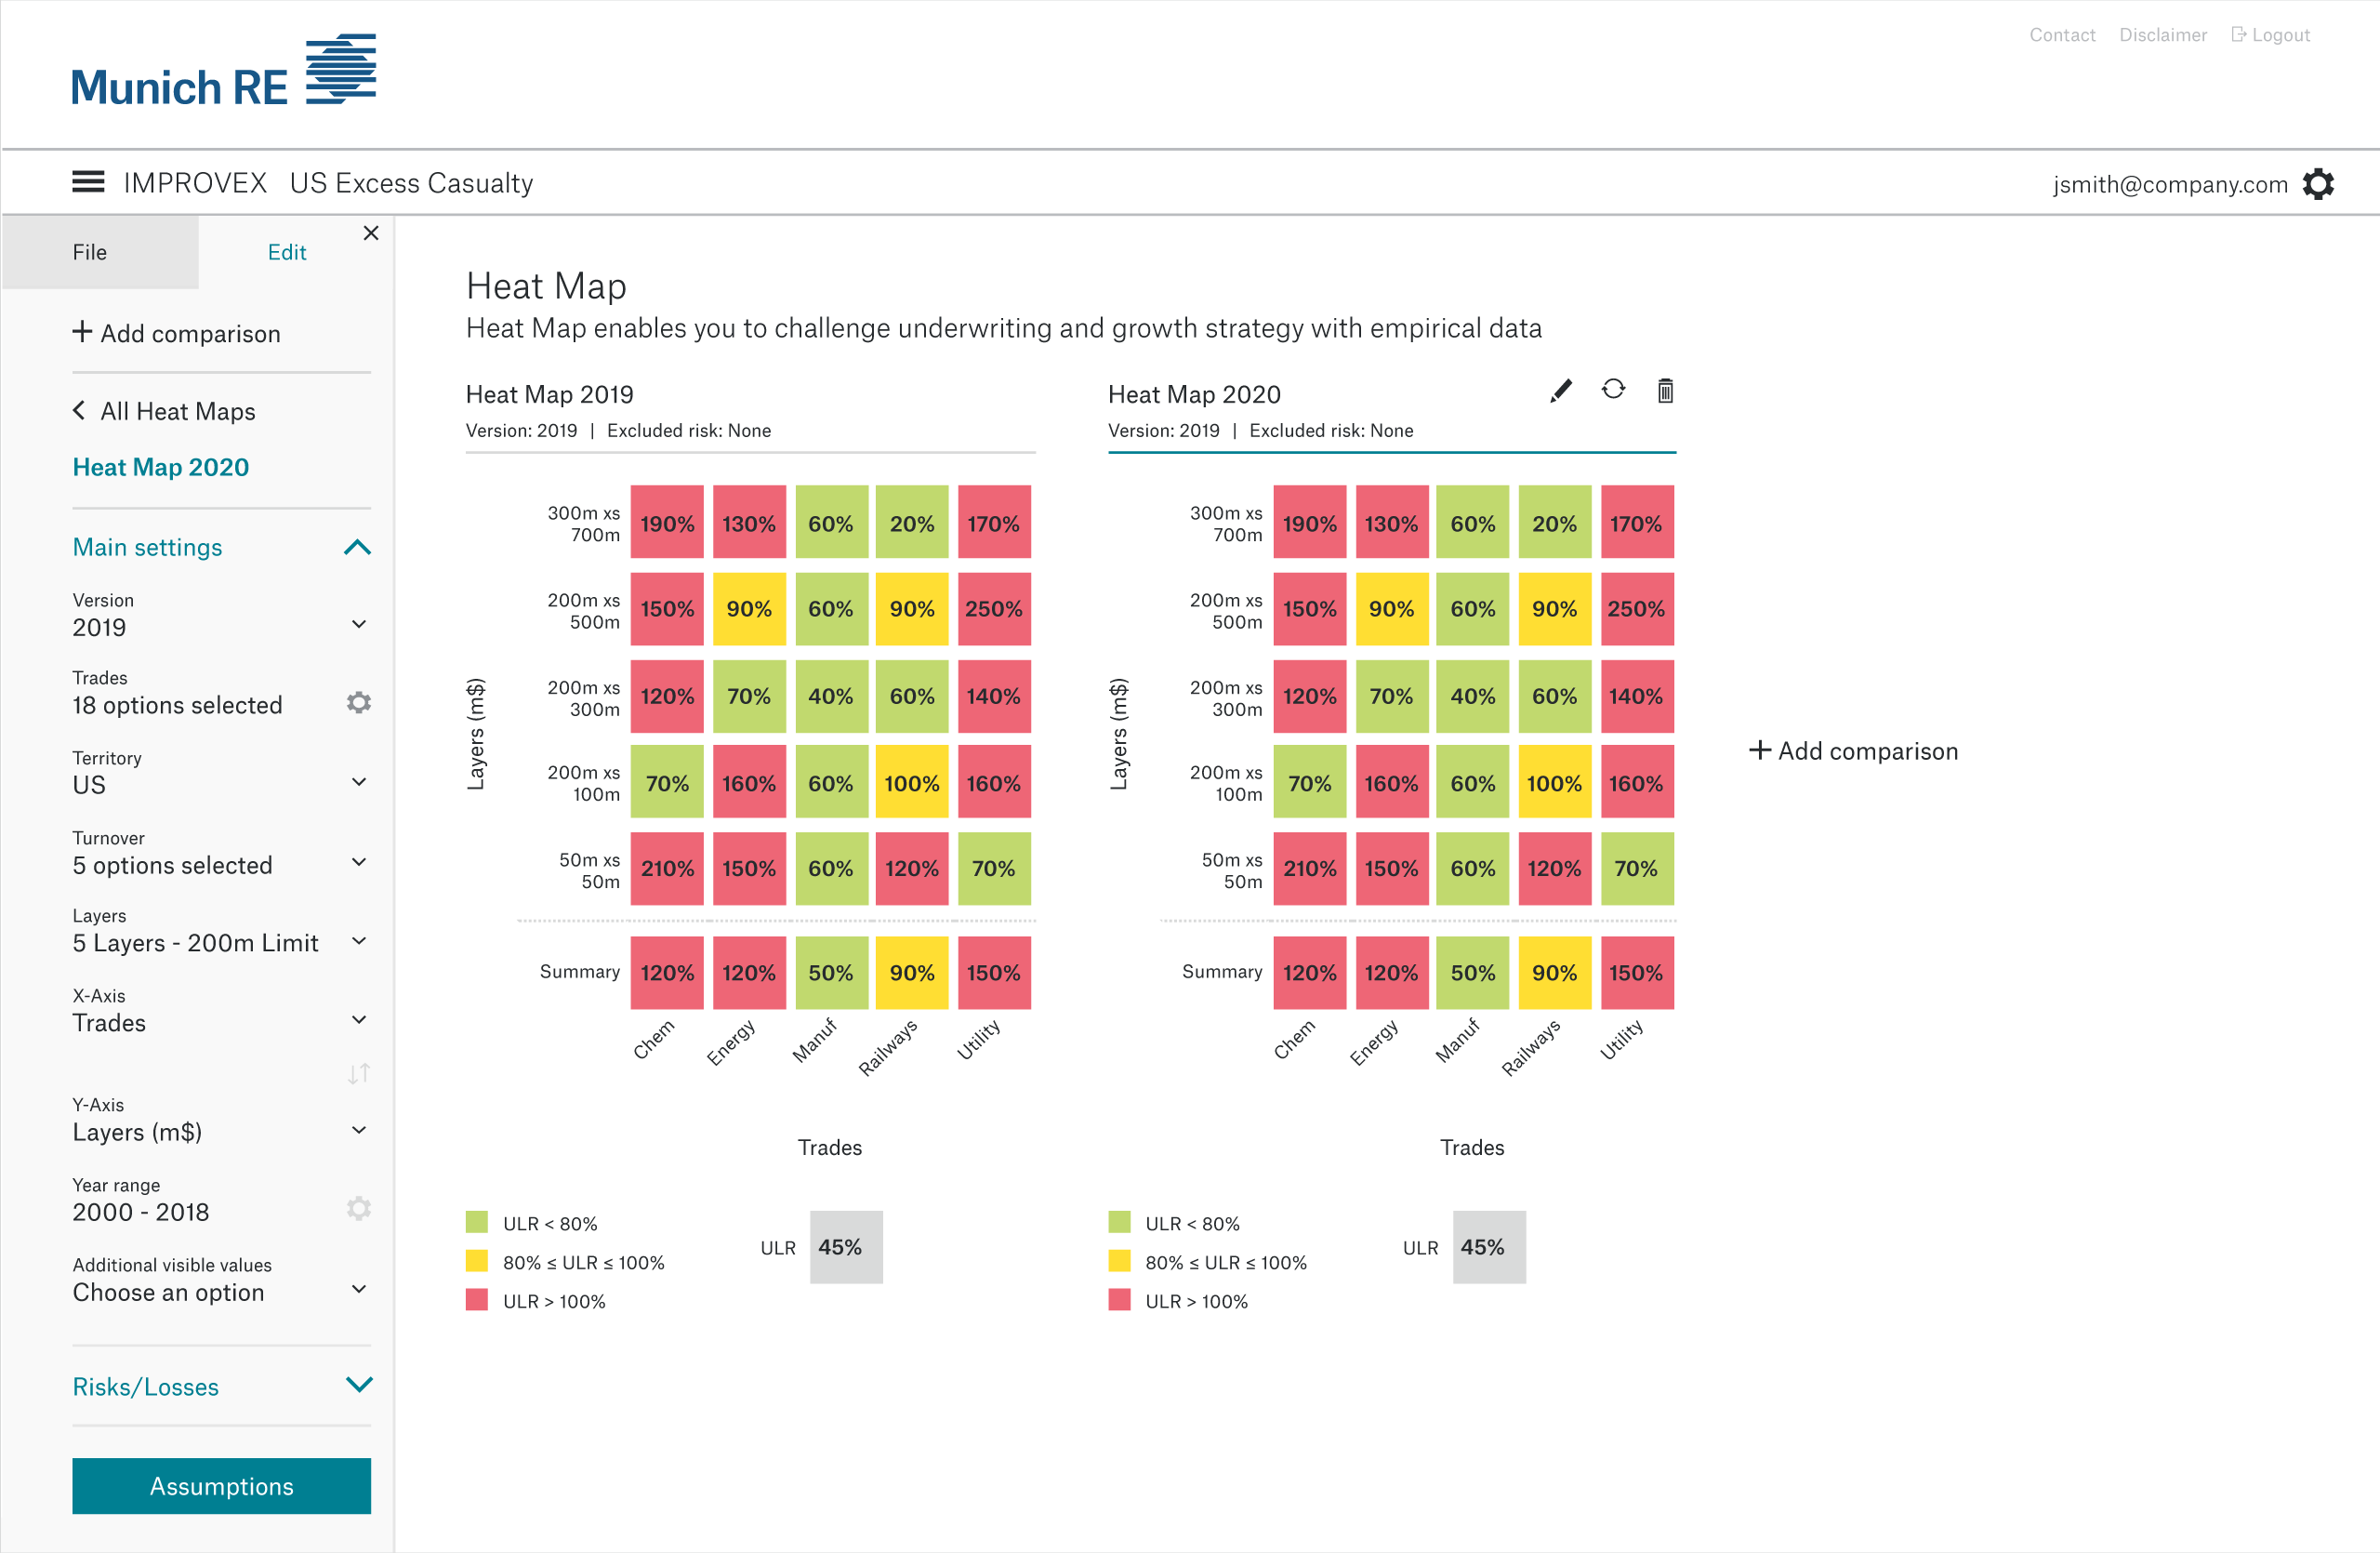 IMPROVEX heat map compare level 1 without_risks